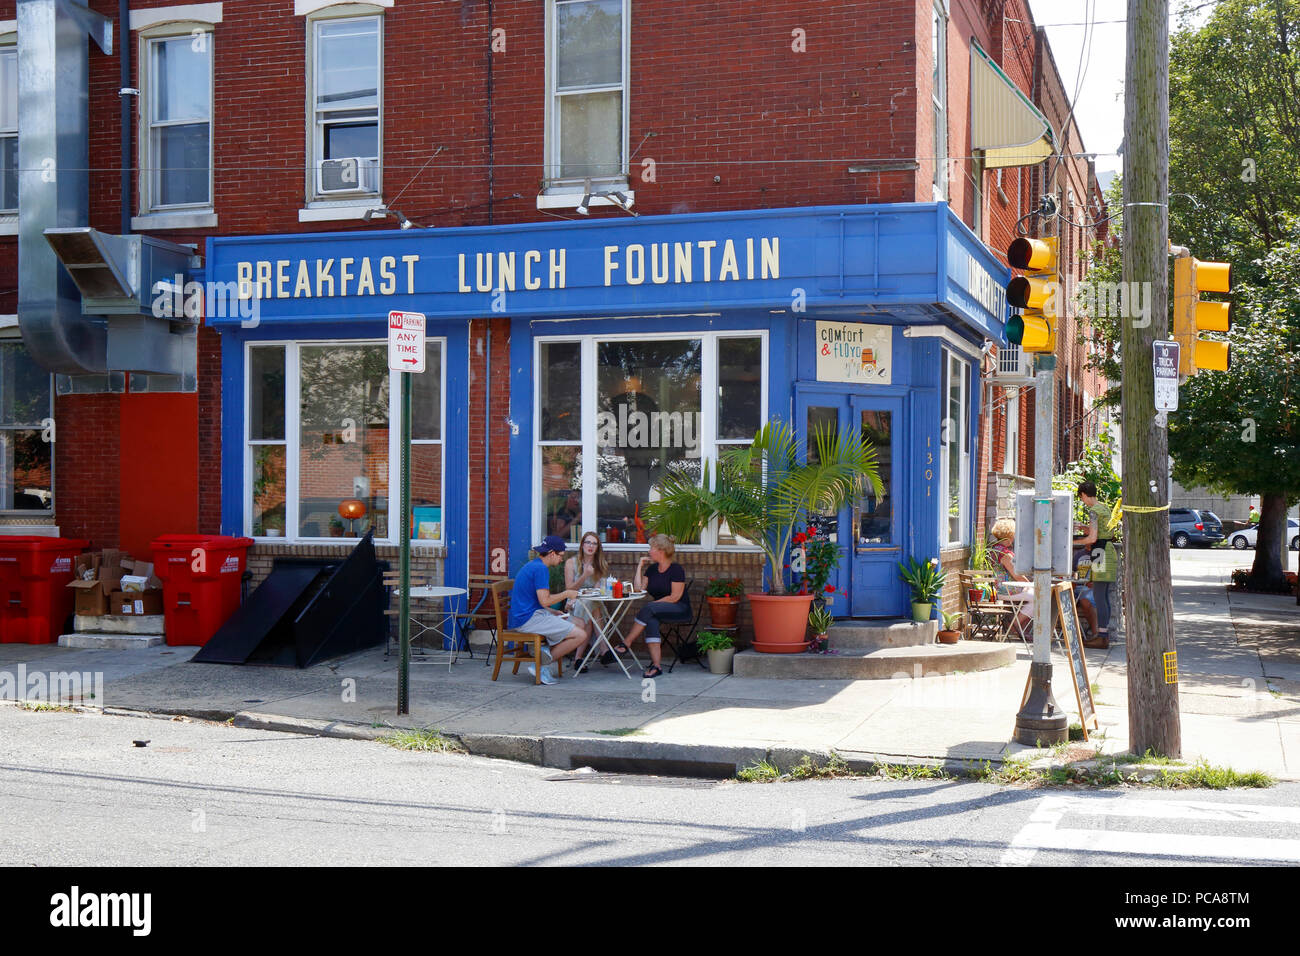 Comfort and Floyd, 1301 S 11th St, Philadelphia, PA. exterior storefront of a restaurant, and sidewalk cafe in passyunk square. Stock Photo